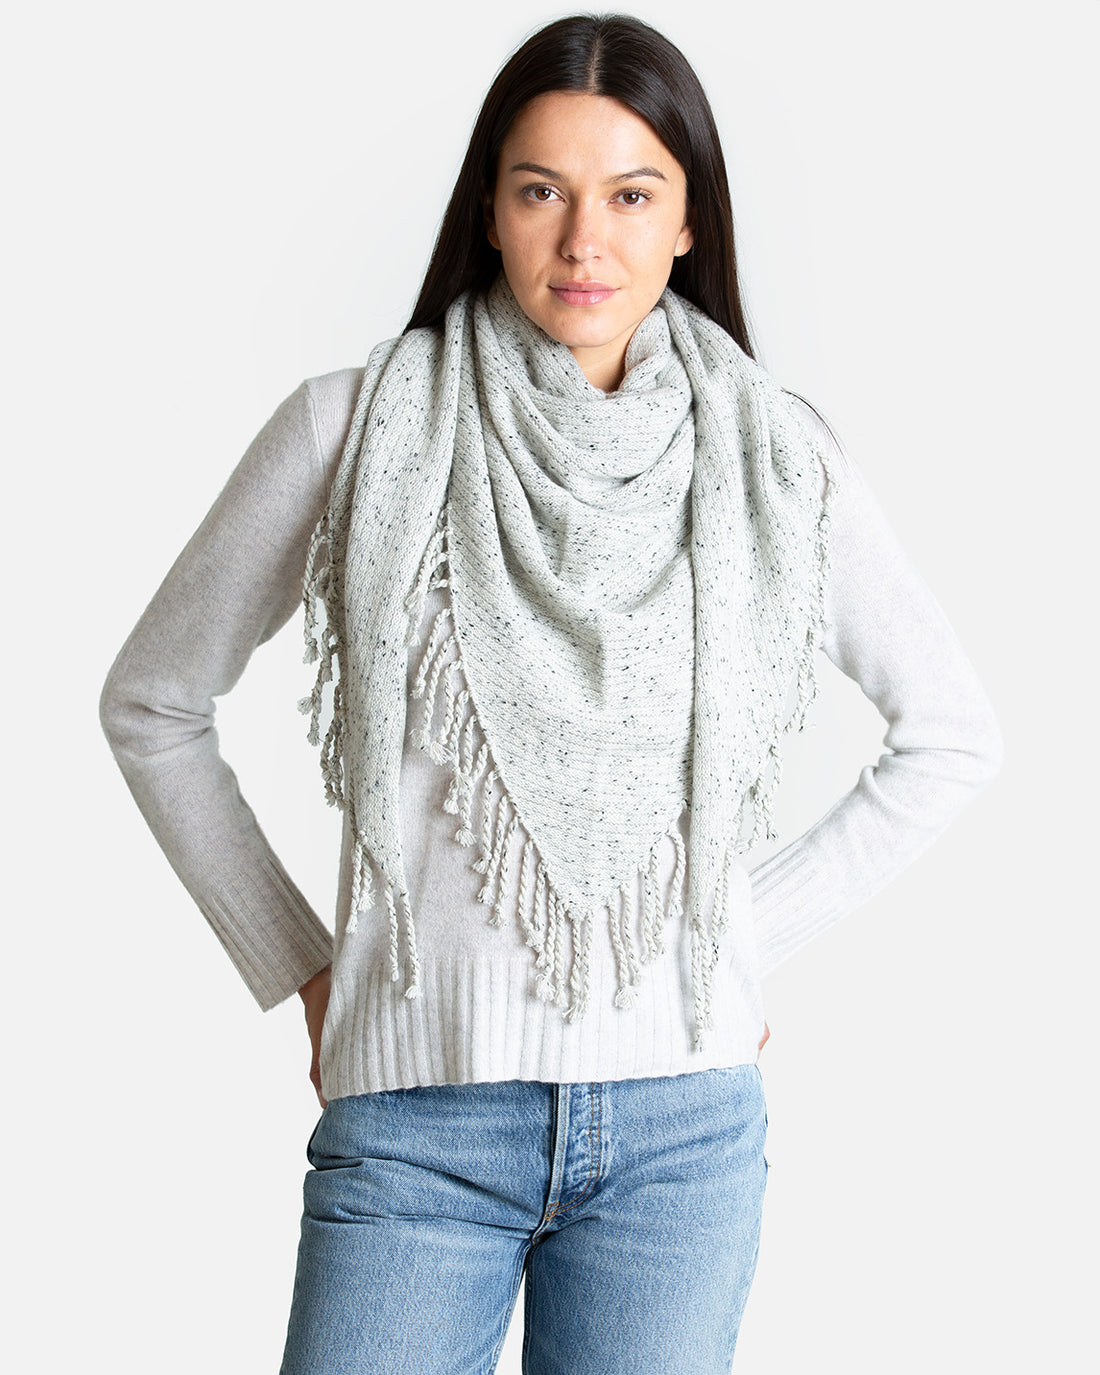 Dropped Needle Cashmere Scarf